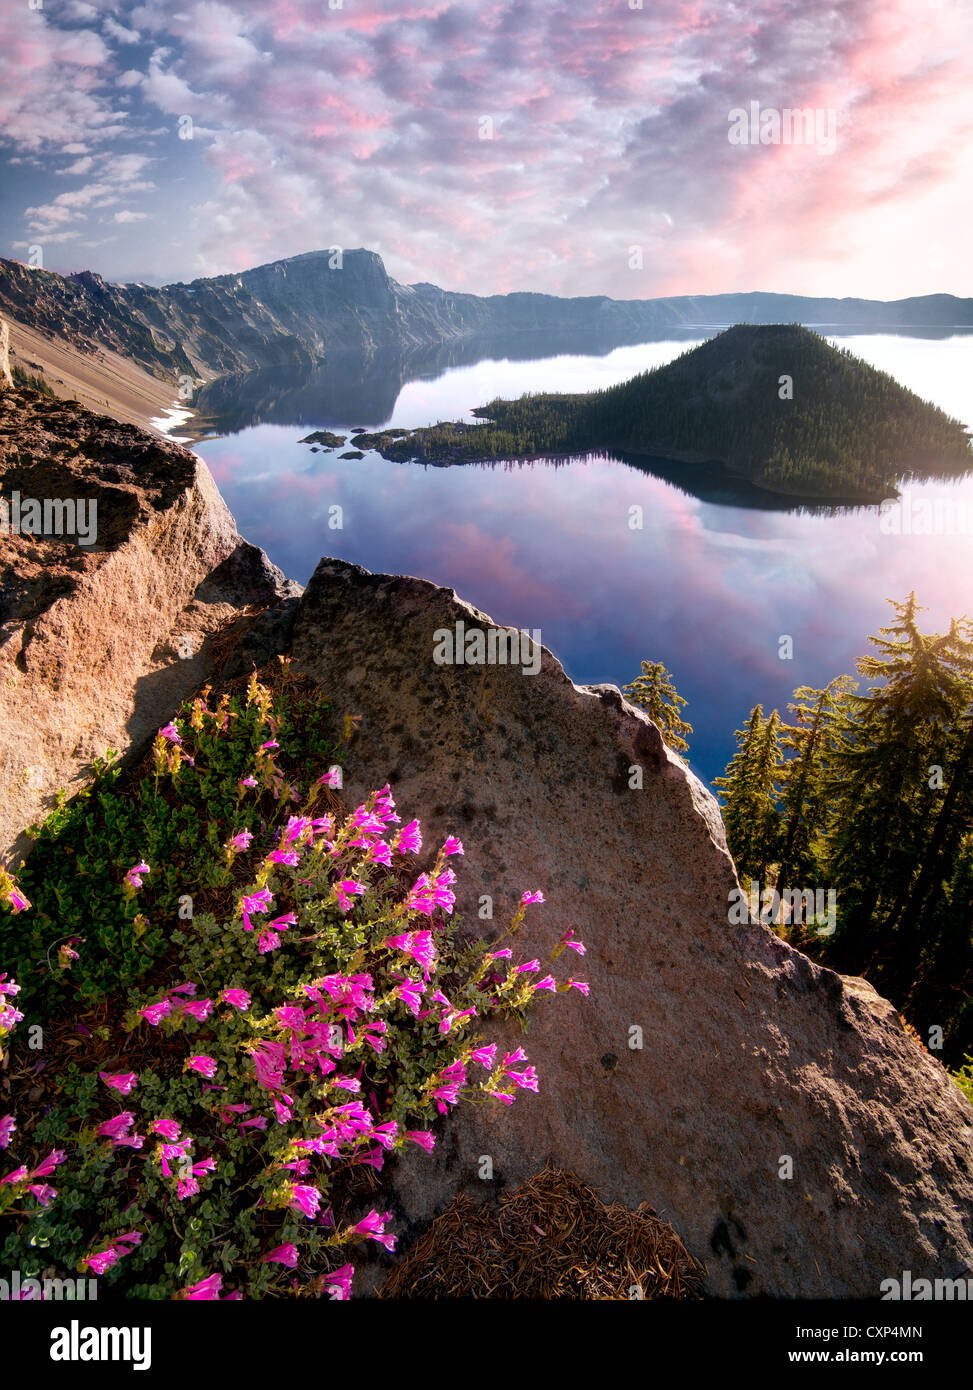 Penstemon growing on rock face of Crater Lake. Crater Lake National Park, Oregon Stock Photo